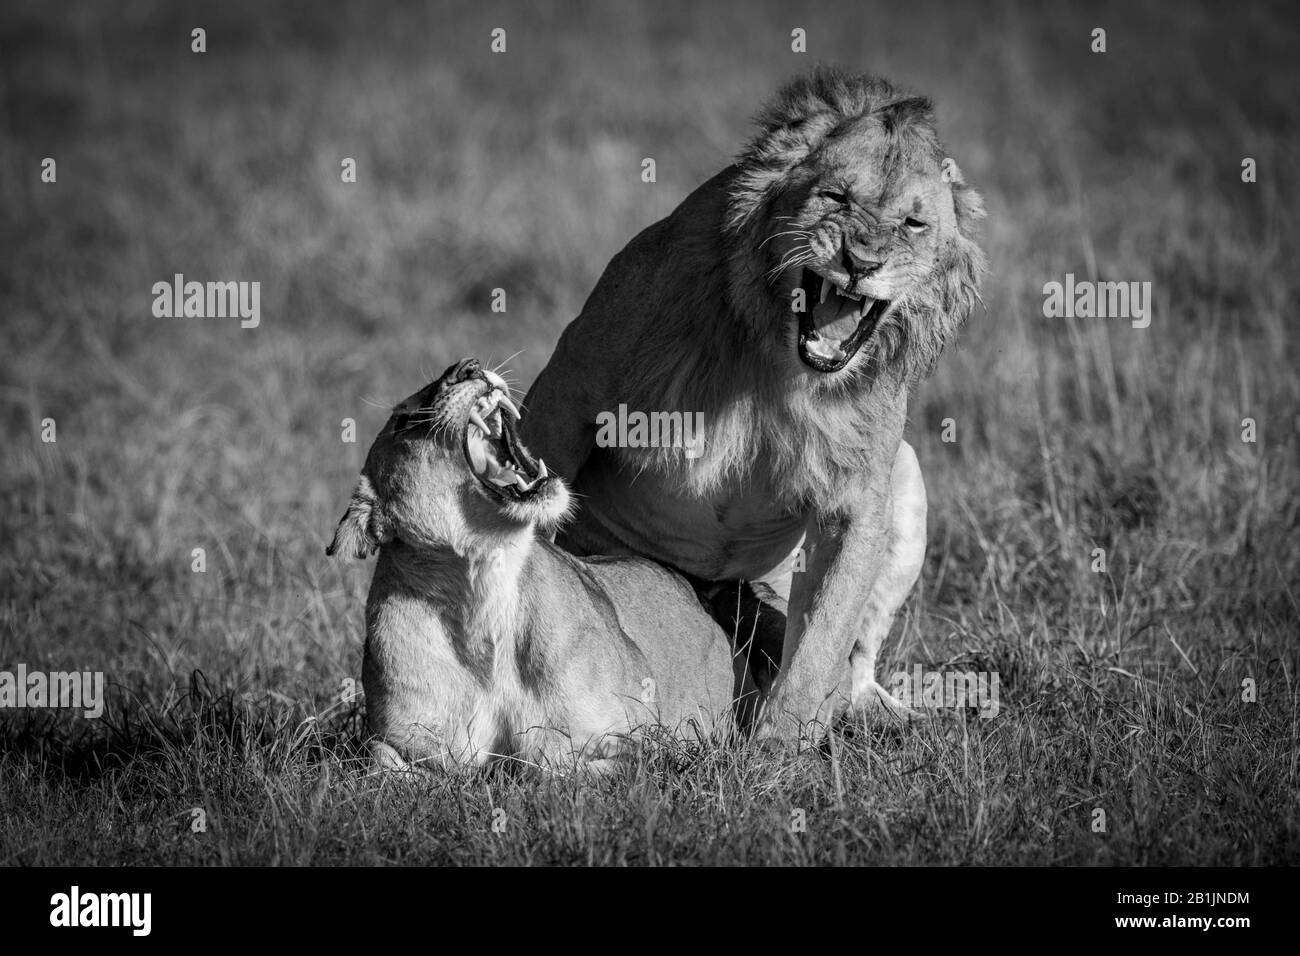 During mating, a male lion and a lioness roar at each other. The female is lying down, and the male is crouching above her. Shot with a Nikon D850 in Stock Photo